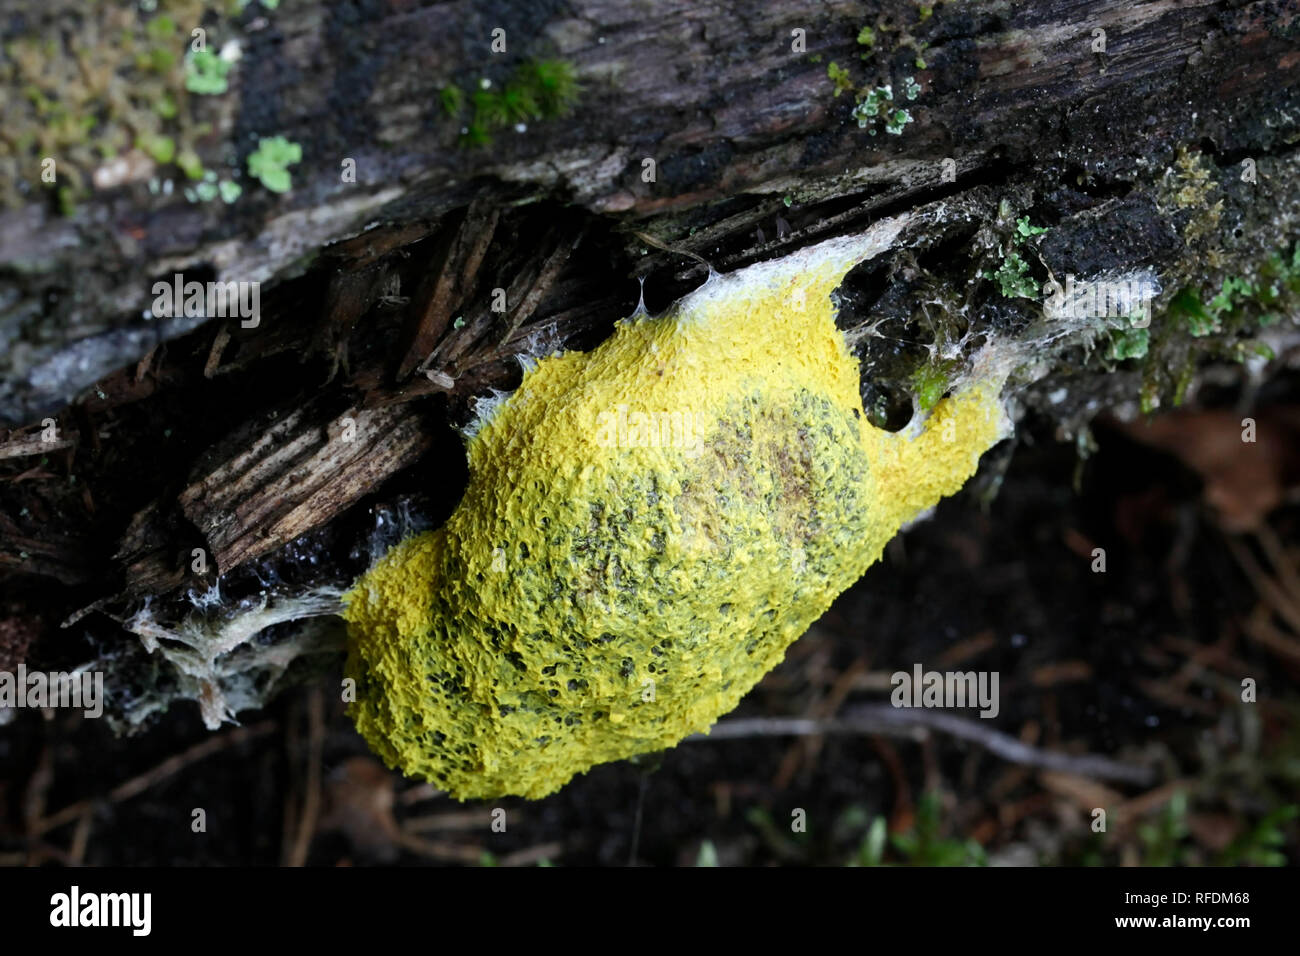 Fuligo septica, commonly called dog vomit slime mold, scrambled egg slime mold, or flowers of tan Stock Photo